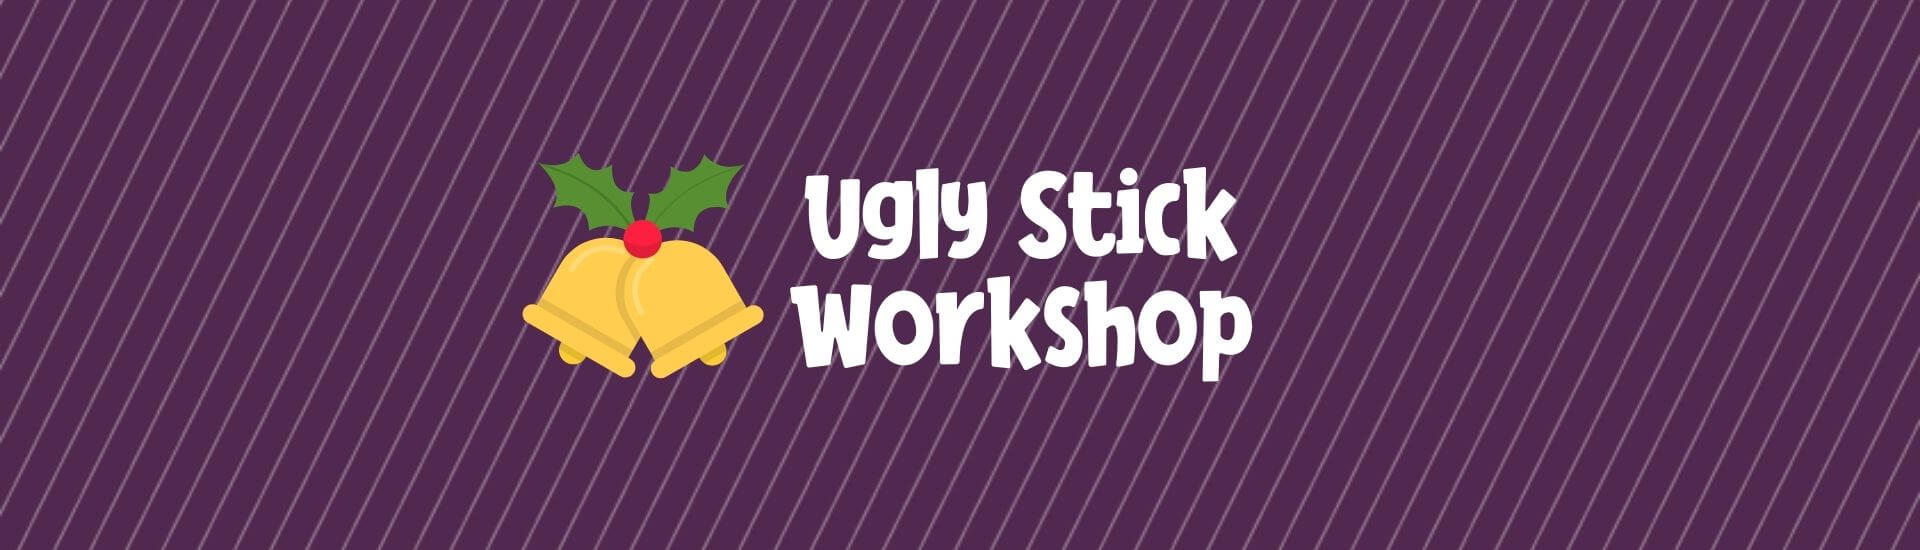 Ugly Stick Workshop - Town of Portugal Cove – St. Philips